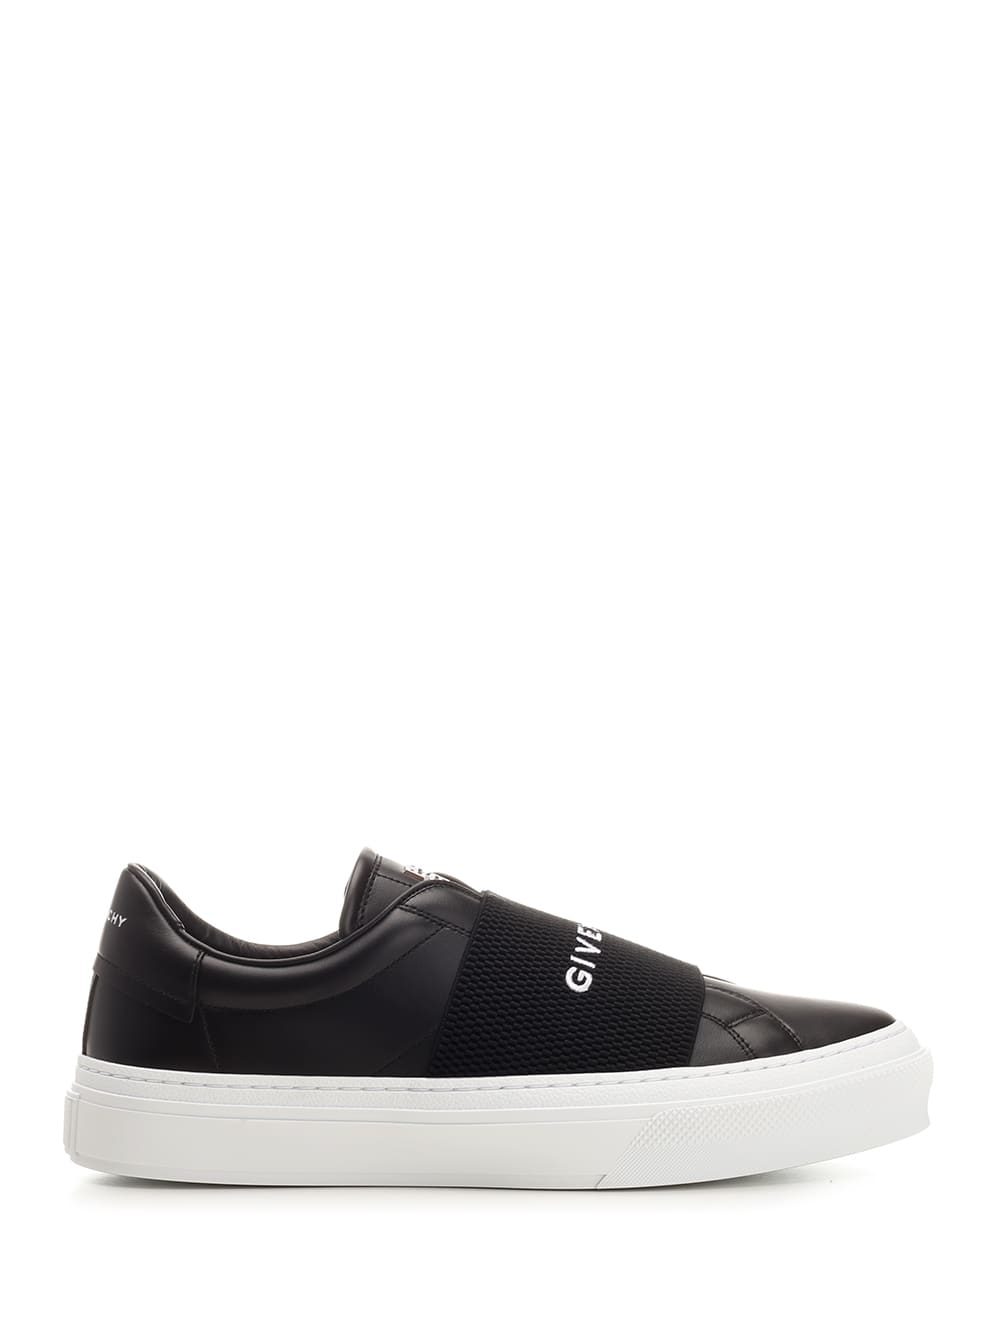 Givenchy City Sport Sneakers In Black